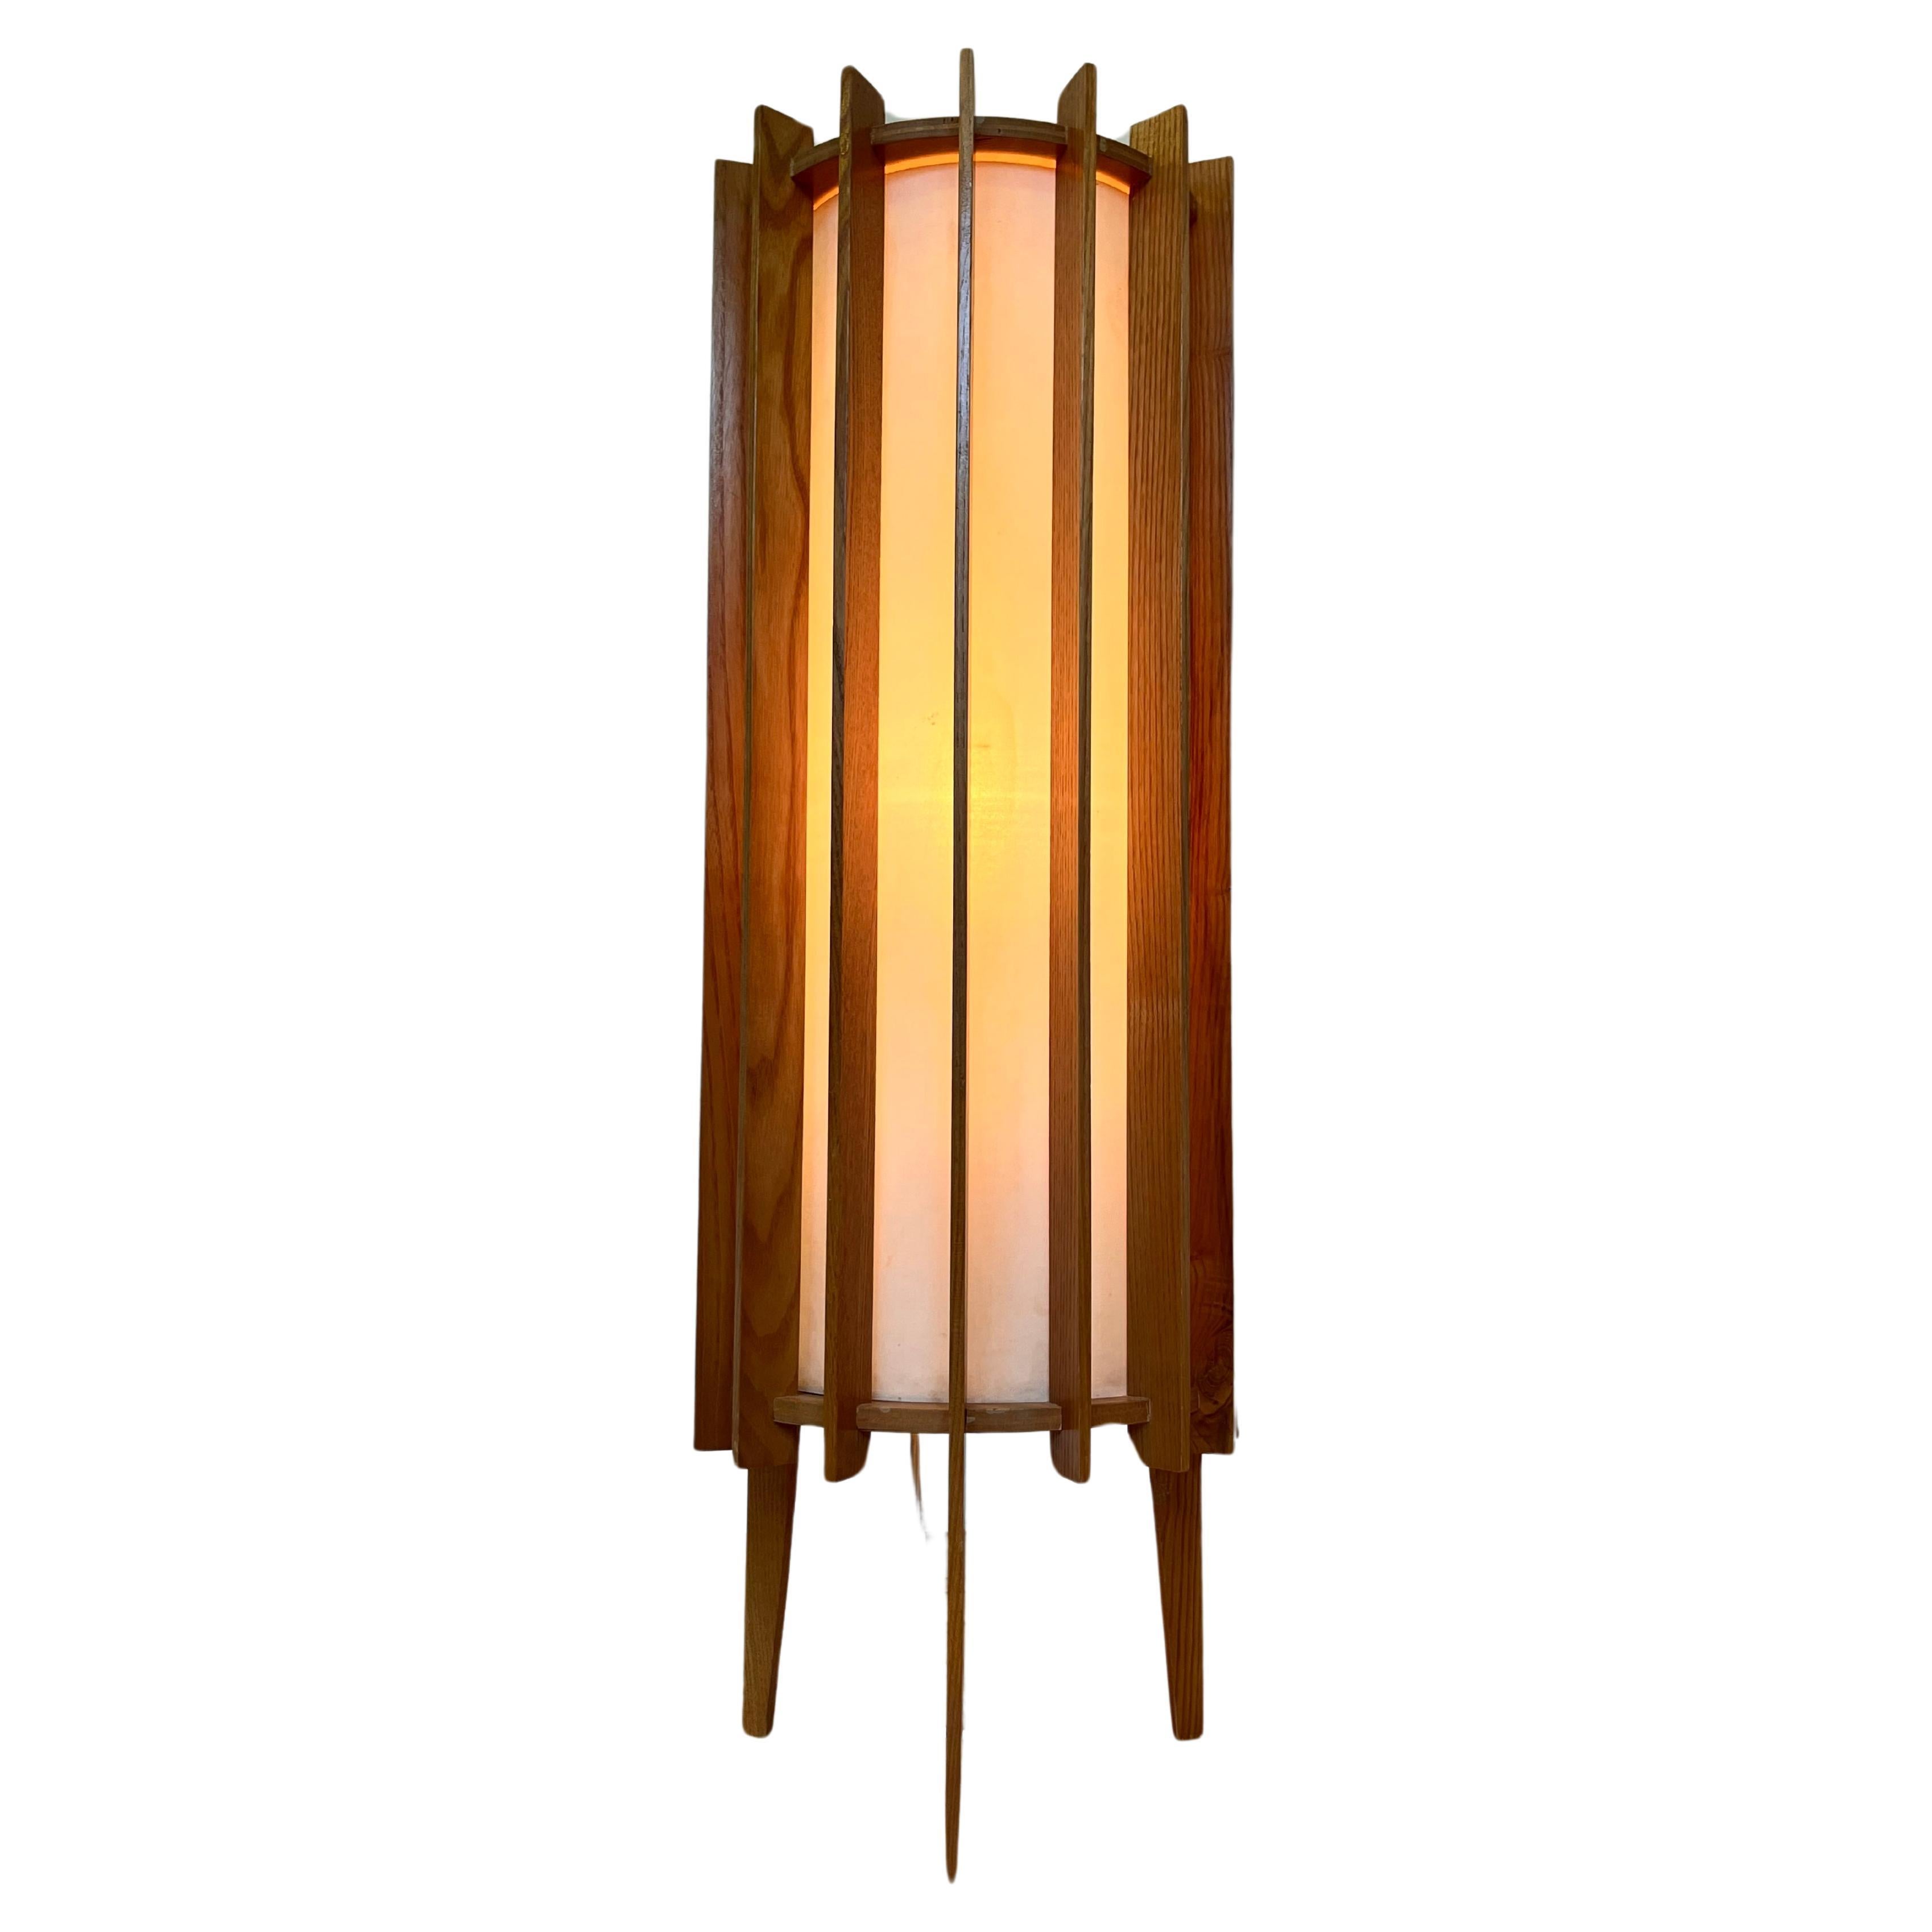 Ib Fabiansen wooden SPACE AGE Floor Lamp by Fog and Mørup - Denmark - 1960s For Sale